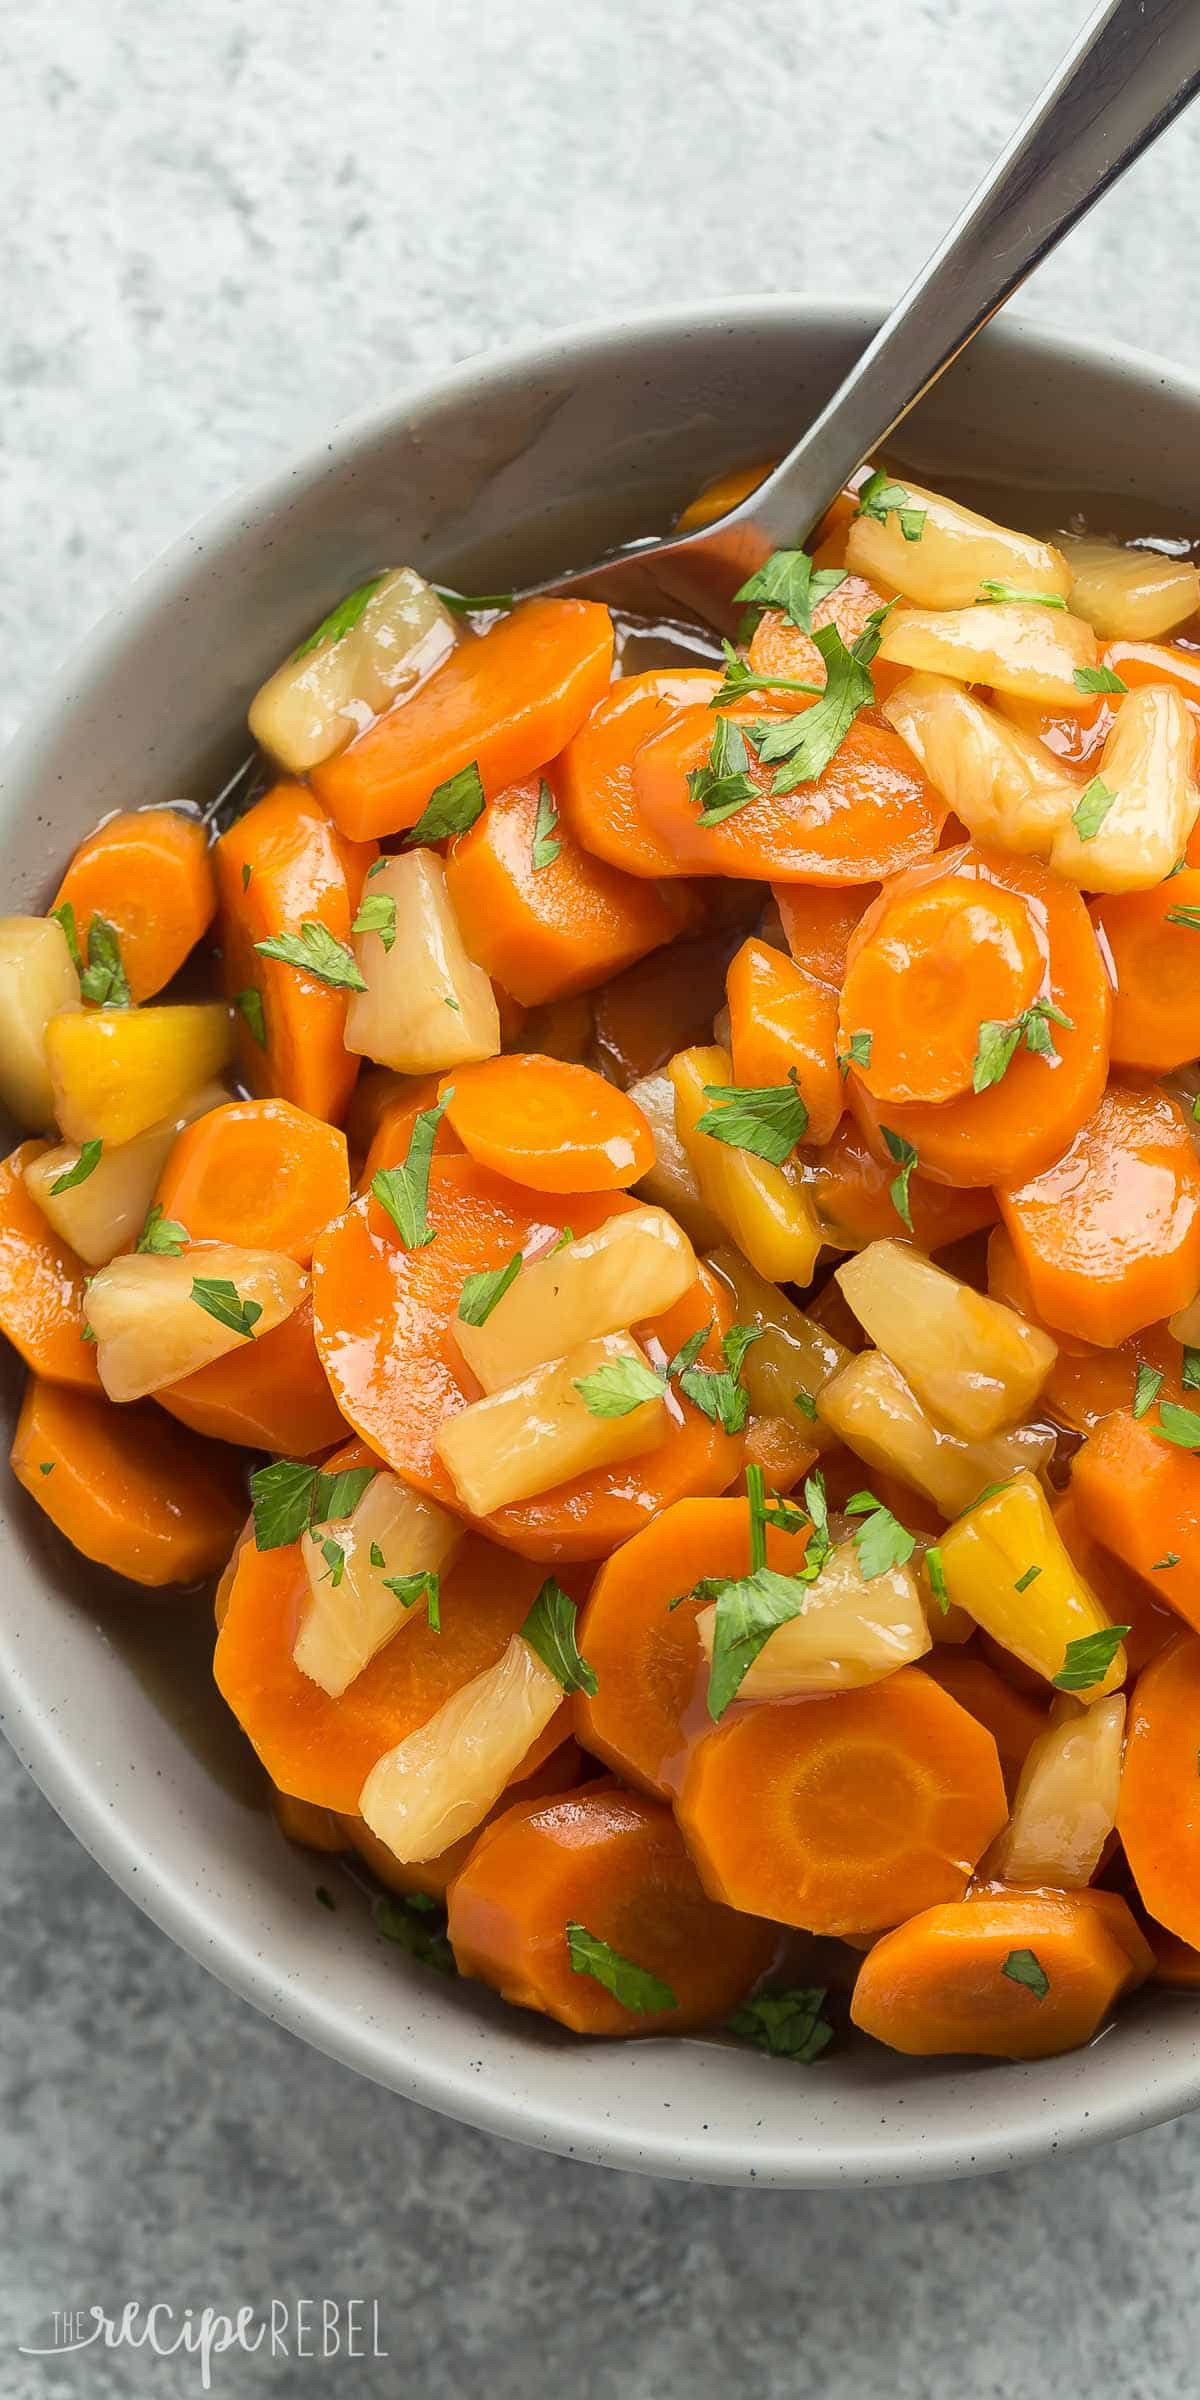 Easter Side Dishes To Go With Ham
 Slow Cooker Pineapple Glazed Carrots Recipe